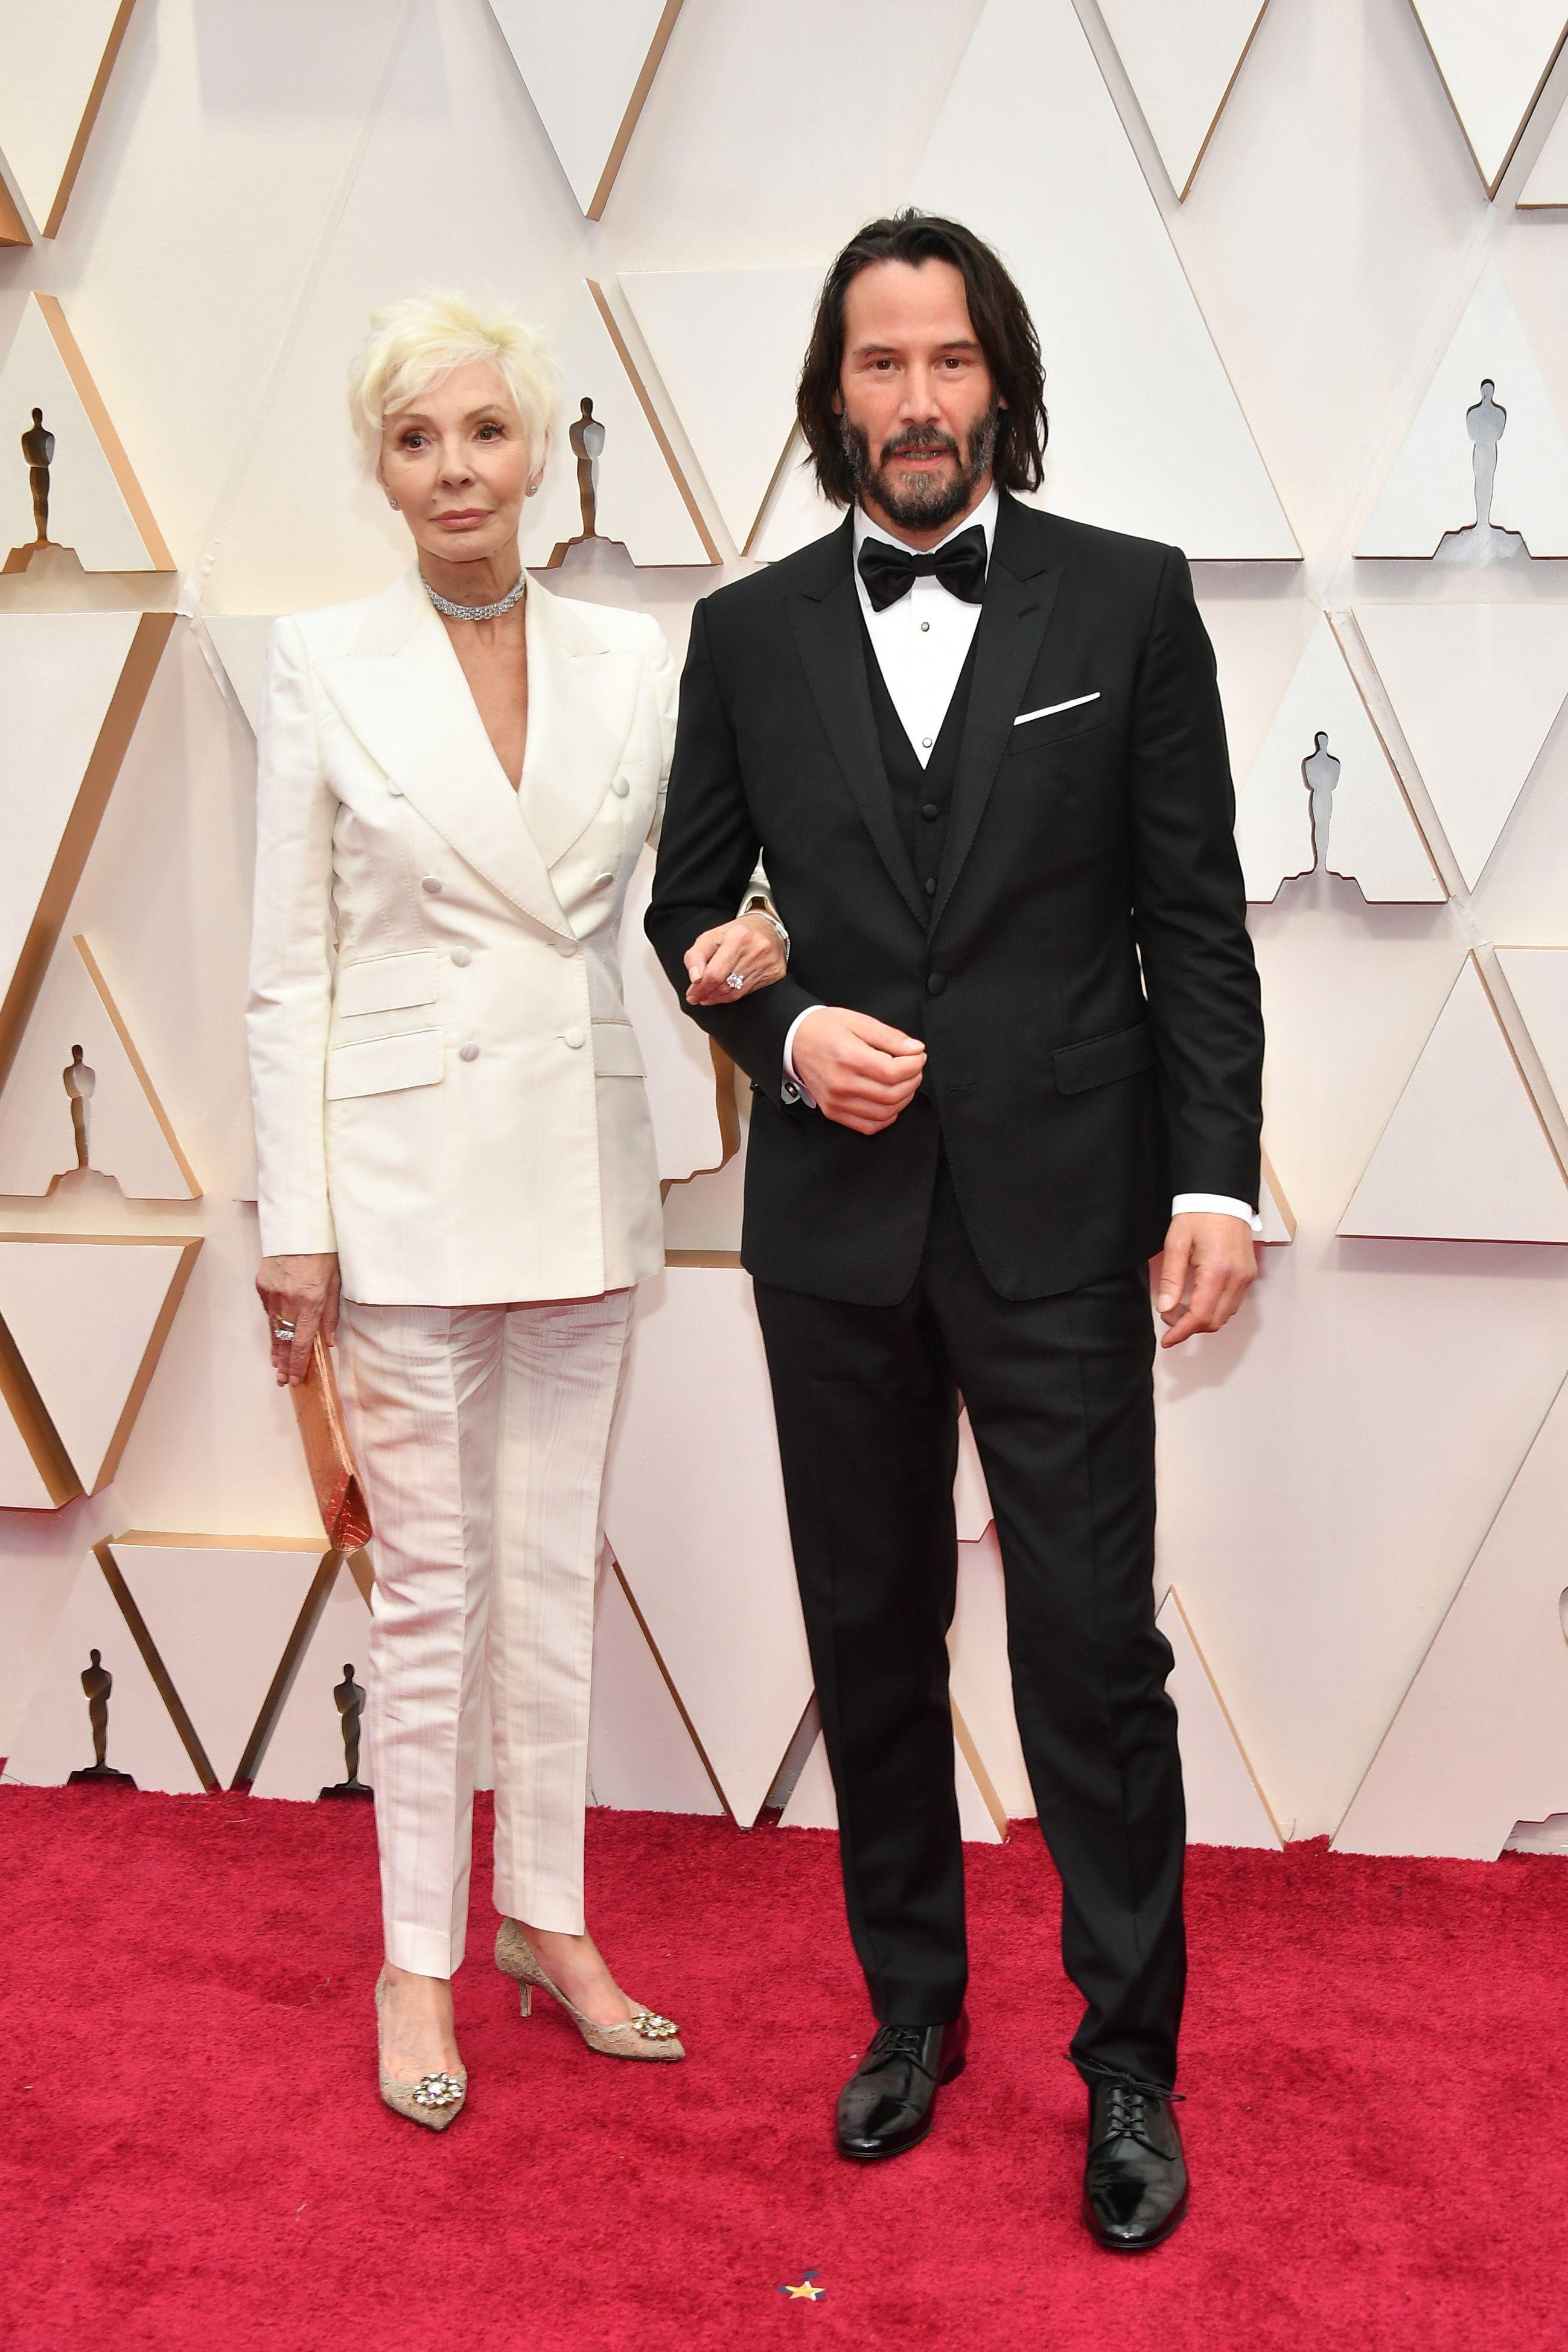 Keanu brought his Mom to the Oscars, allegedly. 